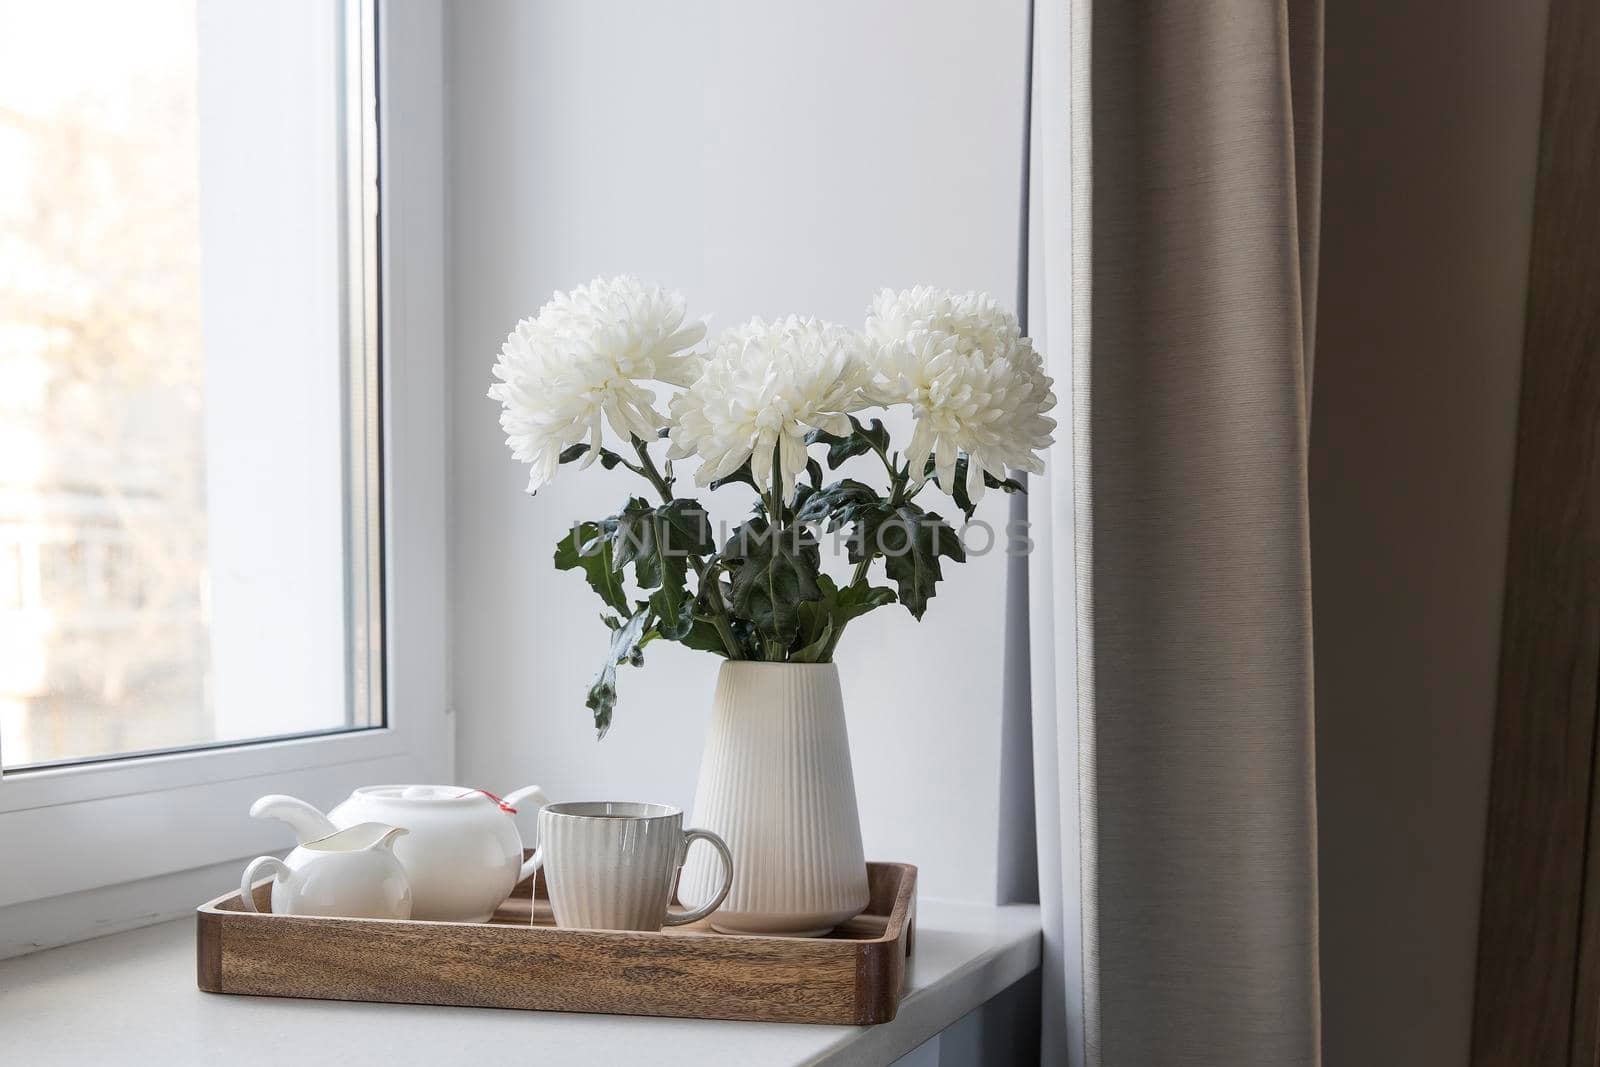 Three white chrysanthemums in a seventies-style fluted vase. Wooden tray with a kettle, milk jug and a cup of tea on the windowsill. Morning breakfast.